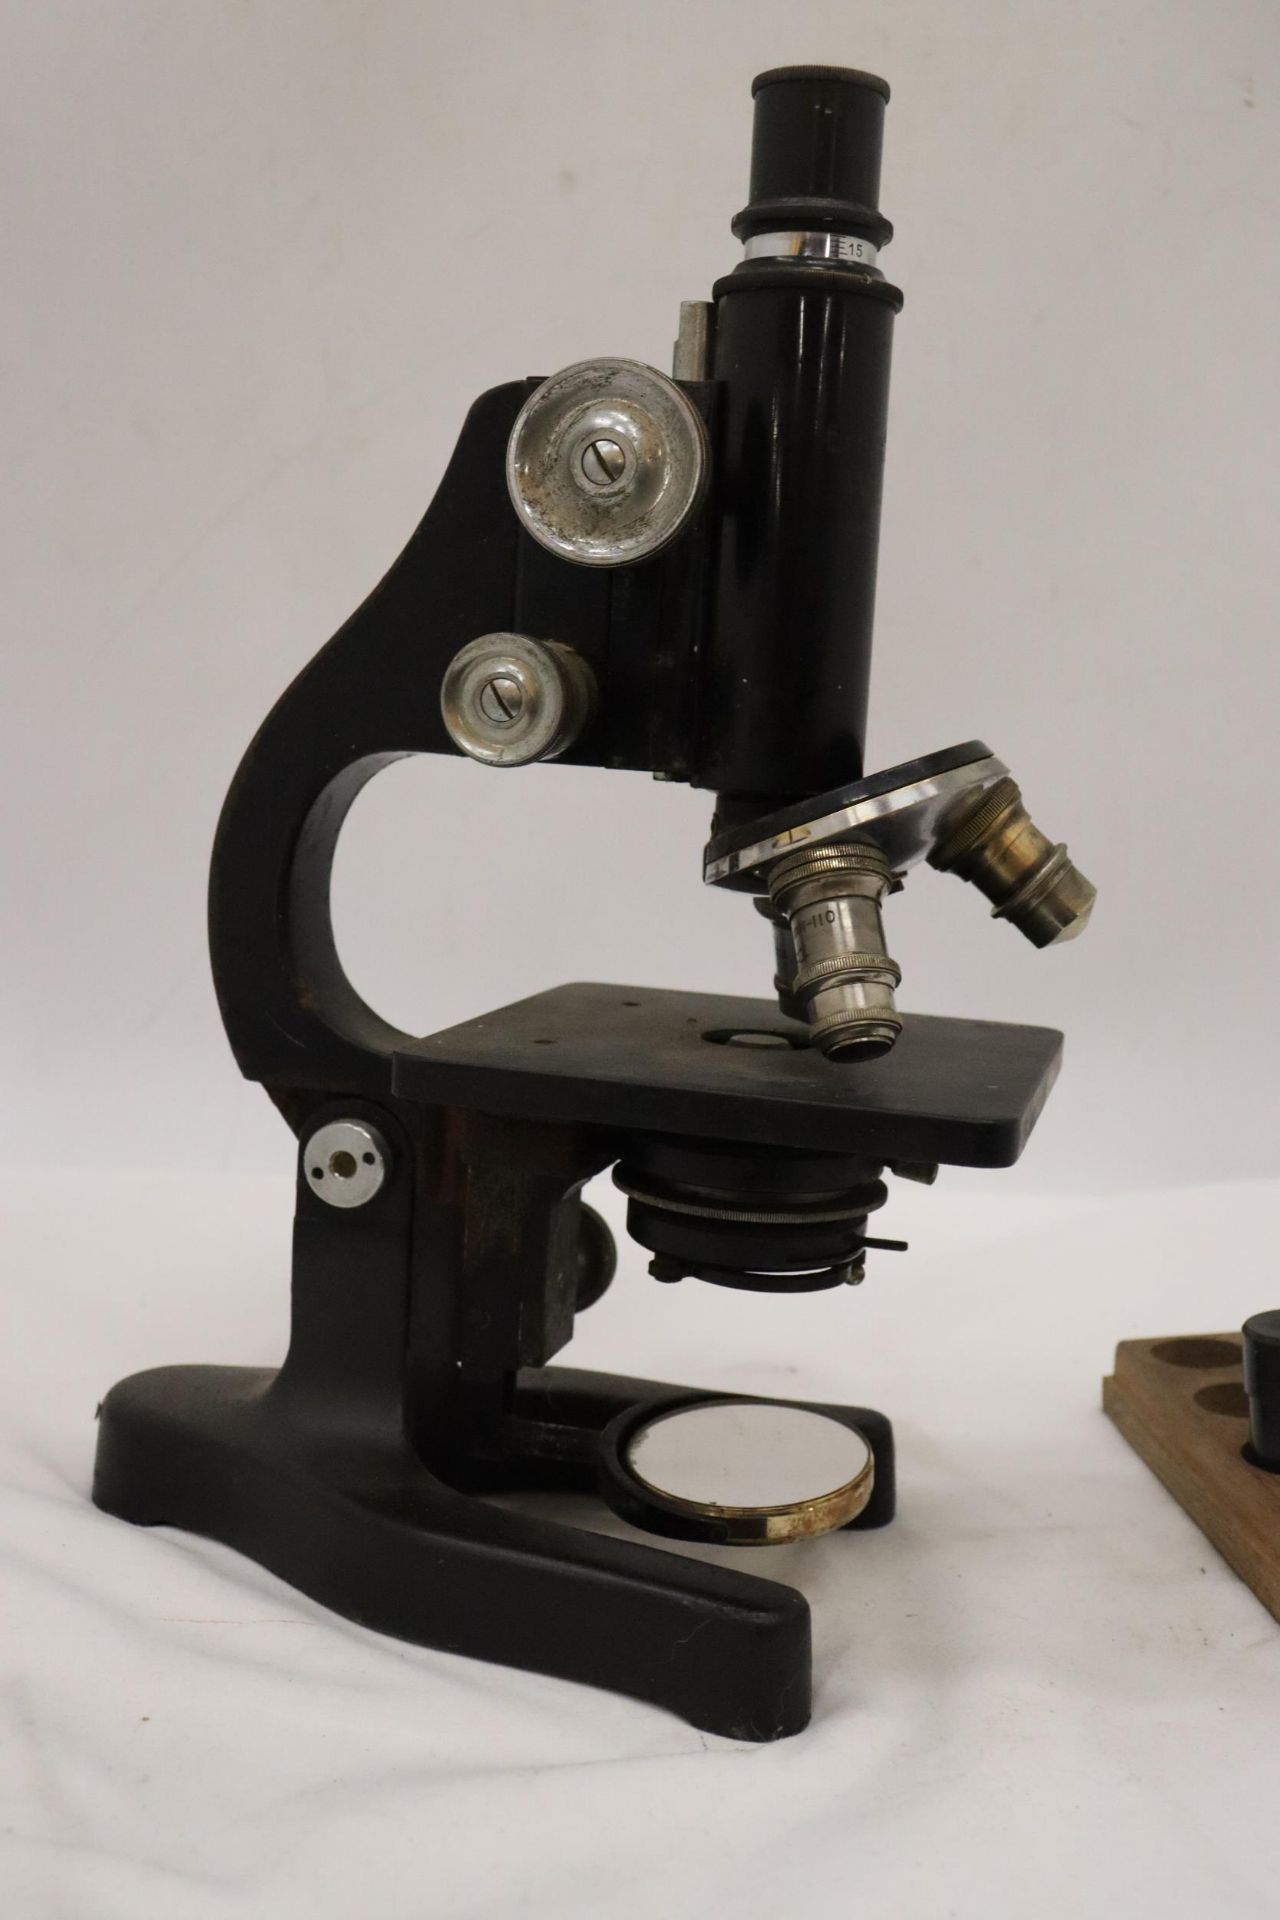 AN ERNST LEITZ WETZLAR MICROSCOPE, NO. 324603, WITH WOOD TRAY AND SPARE LENS - Bild 3 aus 10